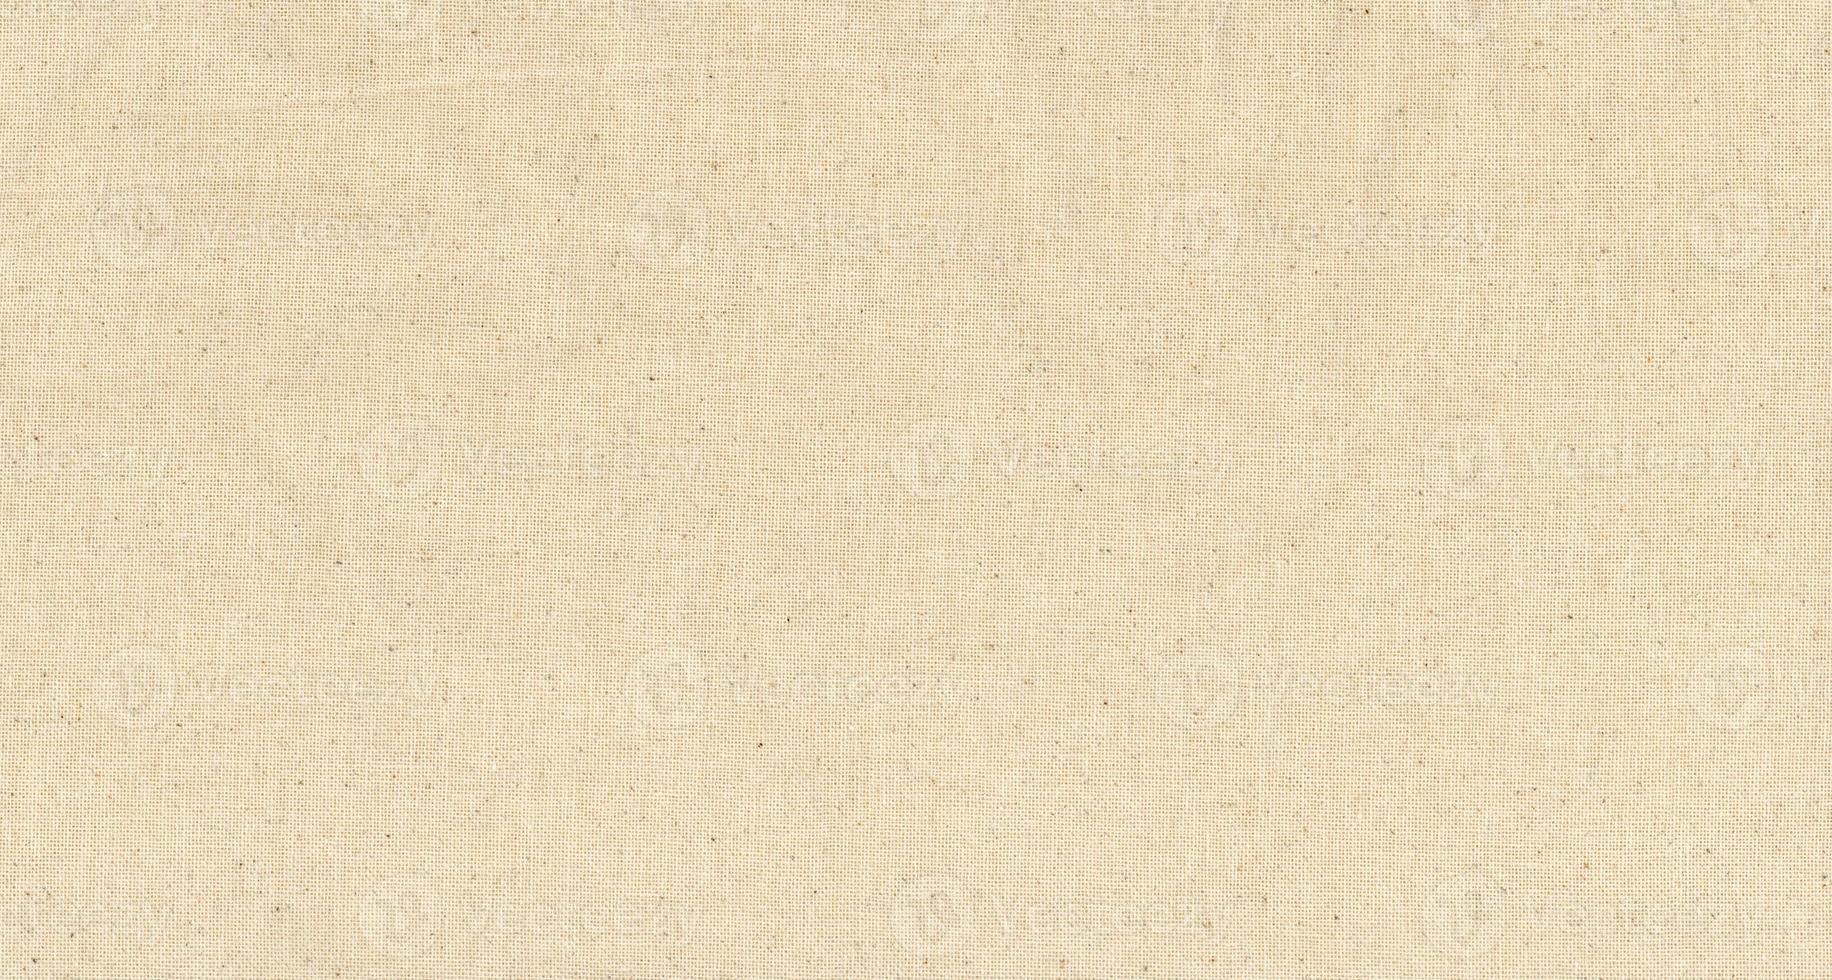 light brown cotton fabric texture background photo